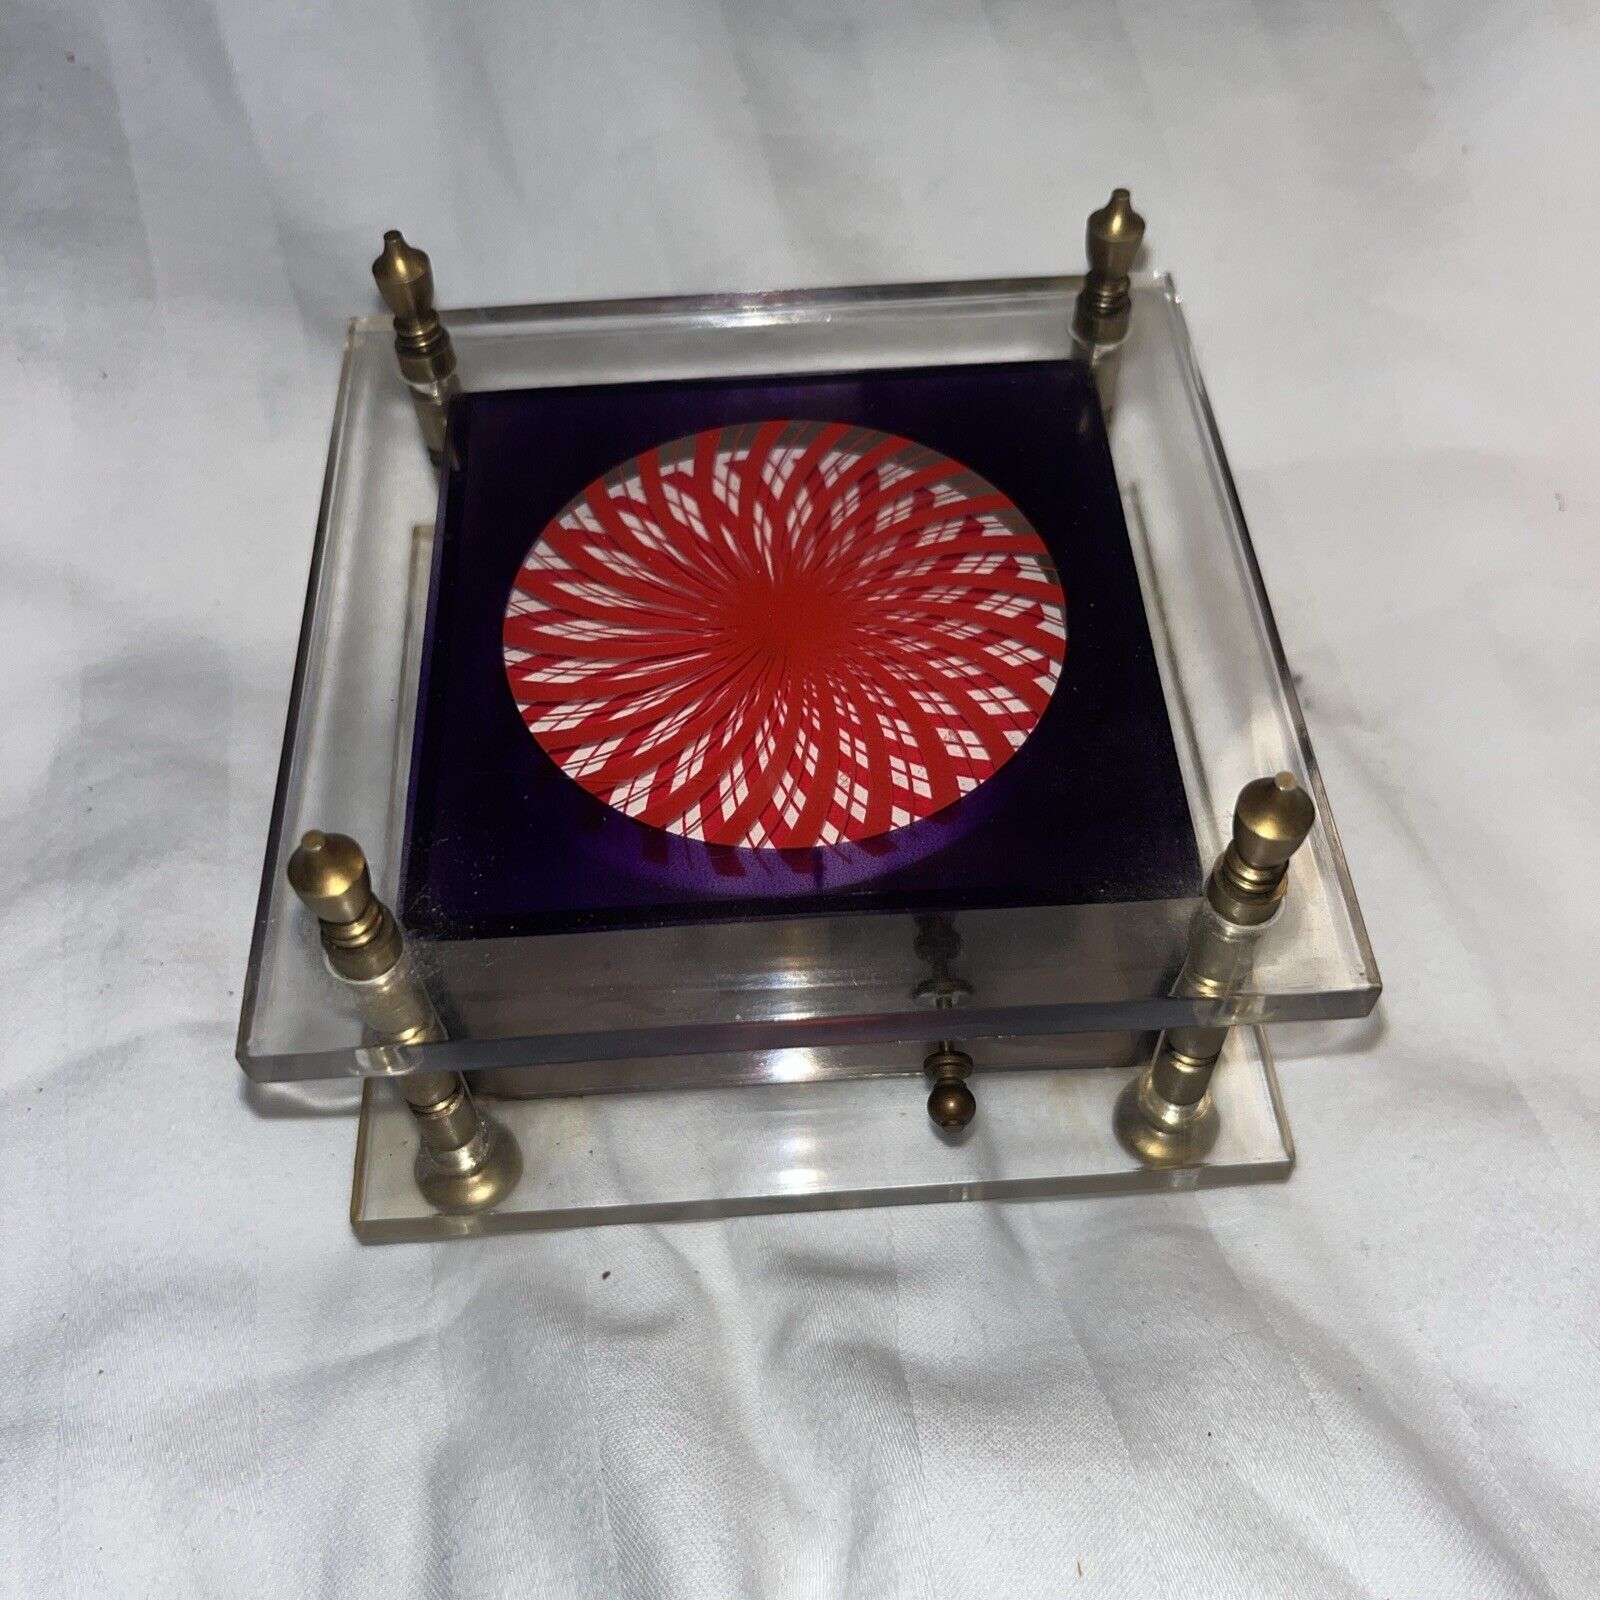 Vintage Japan Kaleidoscope Red/Blue Psychedelic Music Box Lucite Hippie Works.